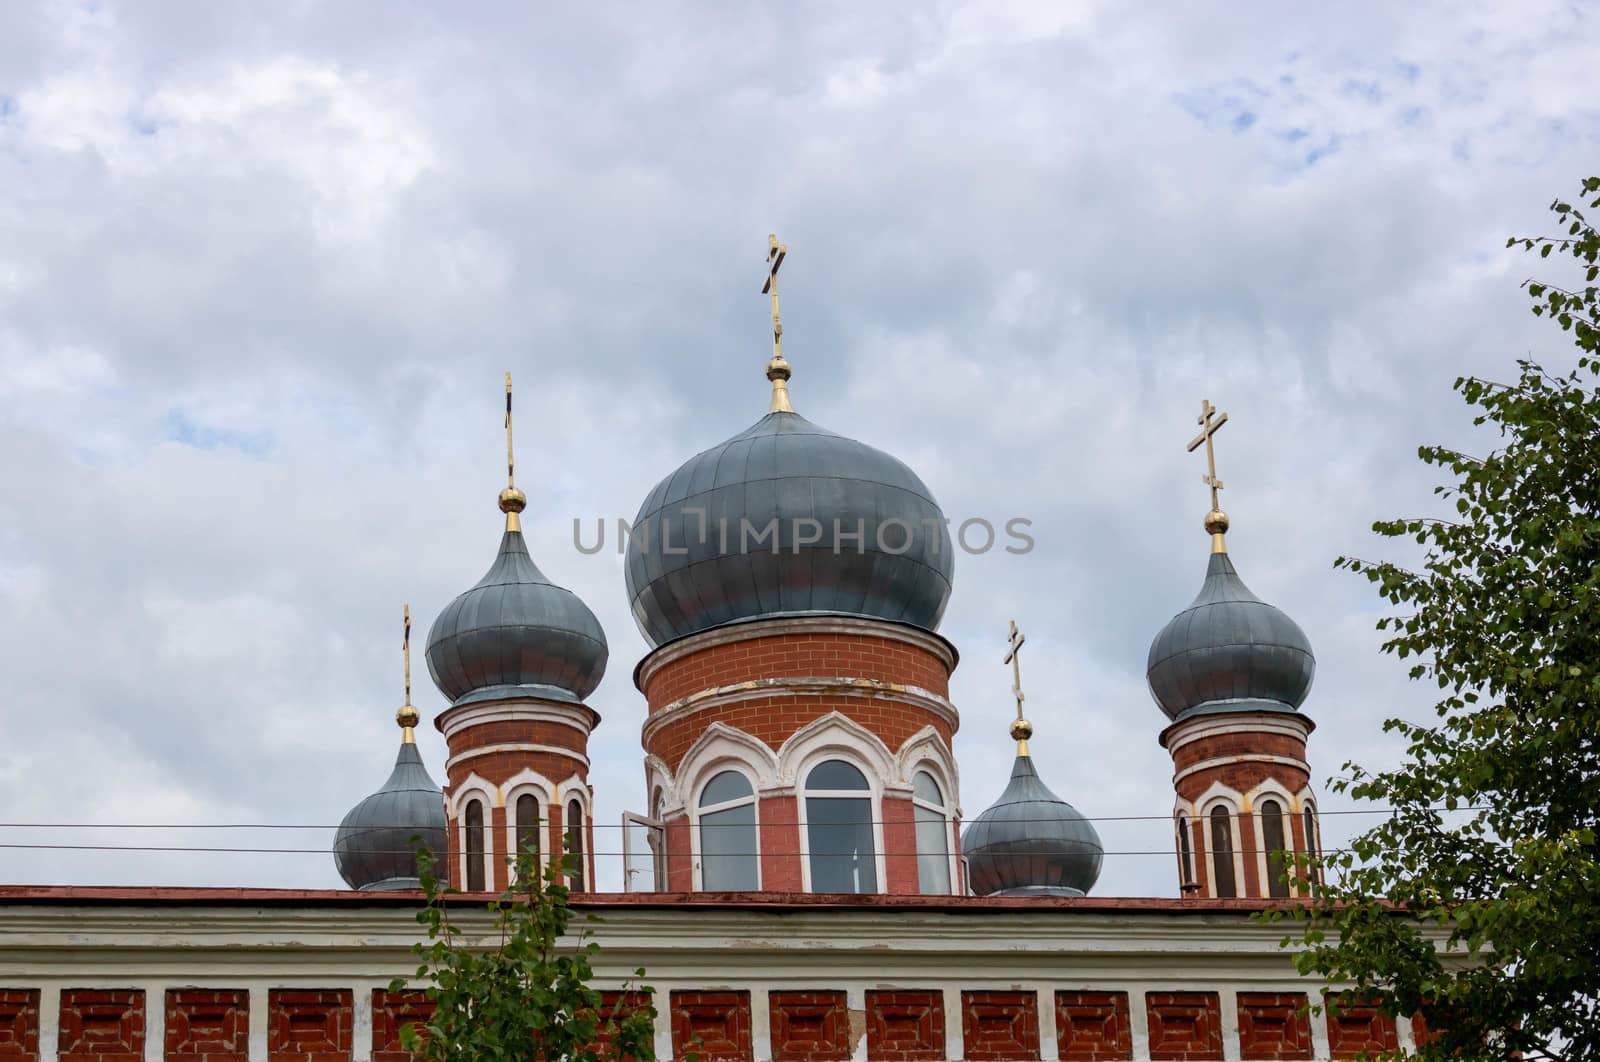 Grey domes with crosses of the Orthodox Church against a cloudy blue sky